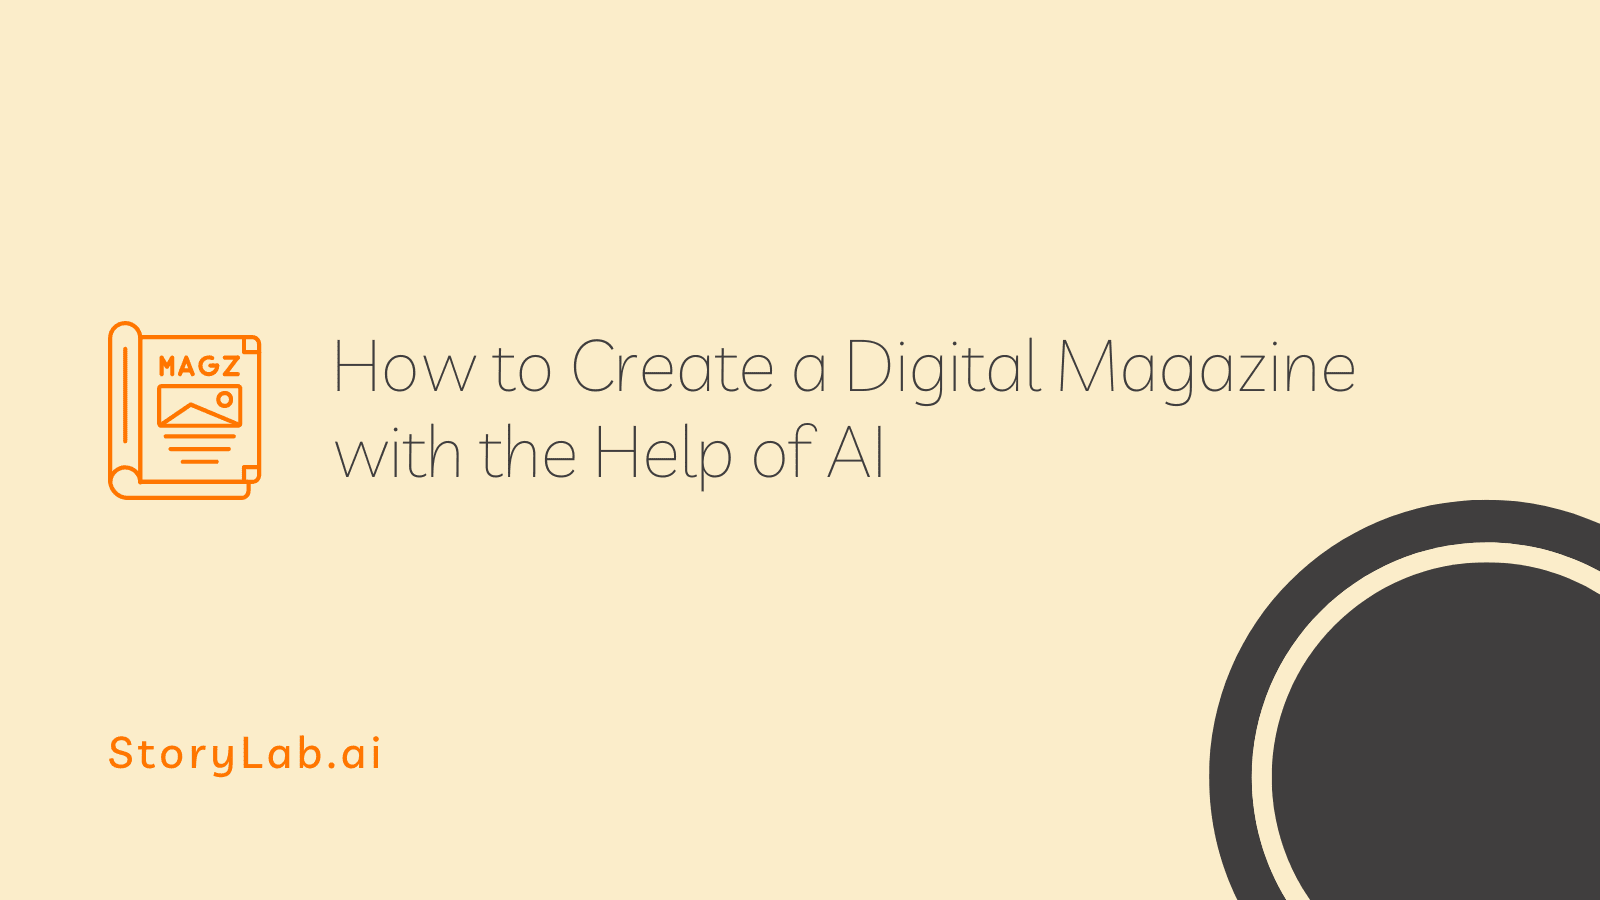 How to Create a Digital Magazine with the Help of AI